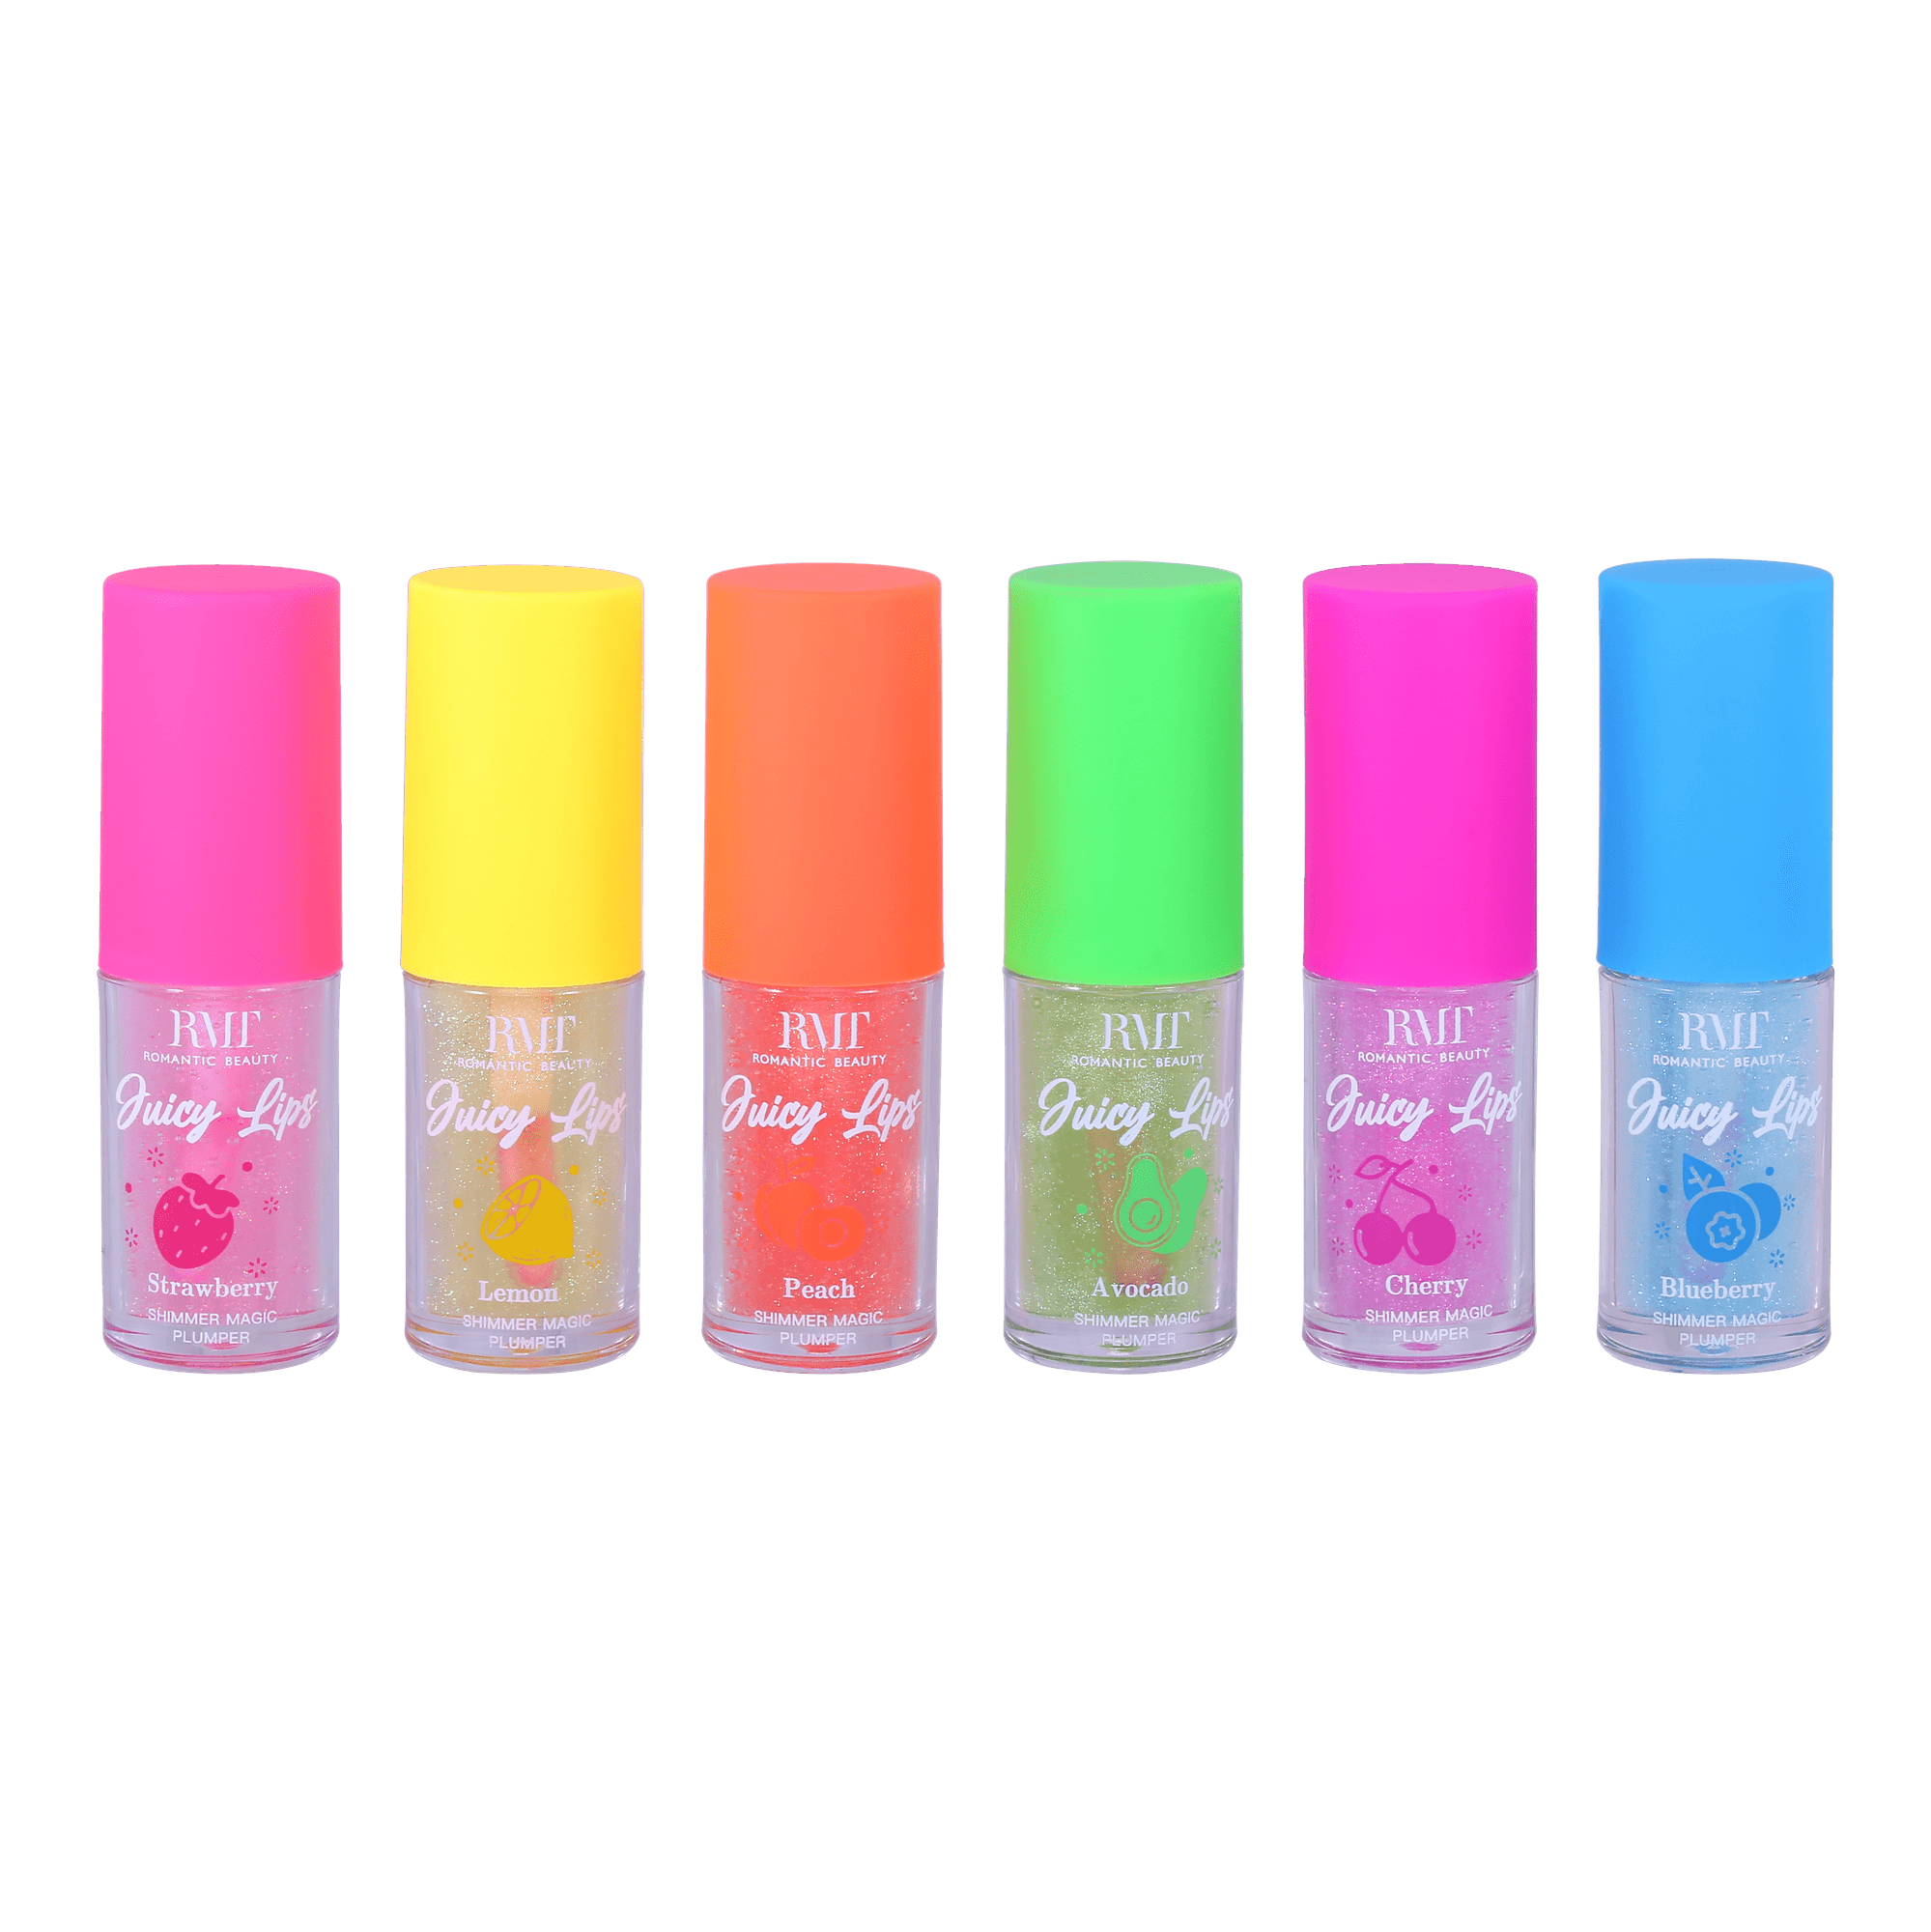 PACK 24 UNIDADES LIP OIL JUICY LIPS